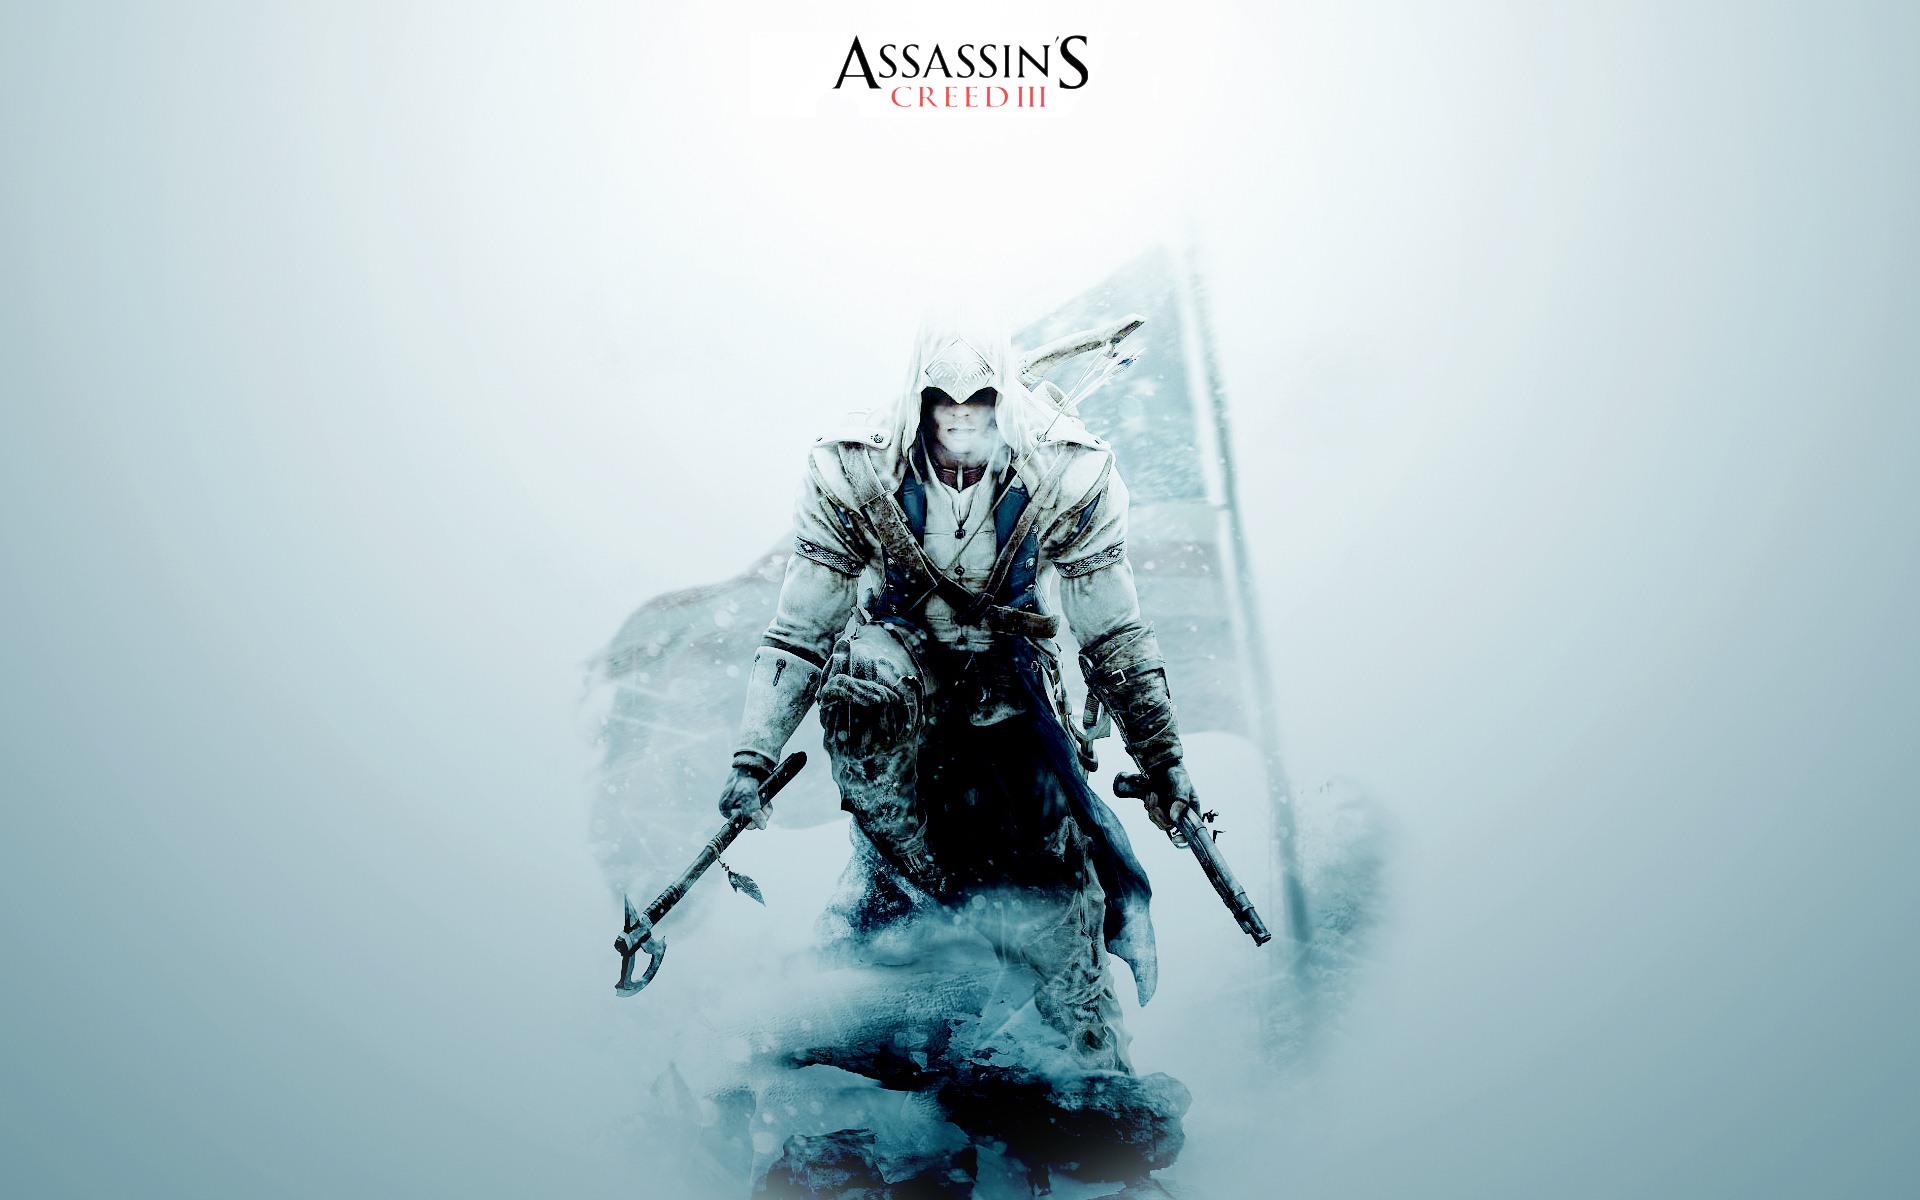 Assassin's Creed 3 HD wallpapers #11 - 1920x1200